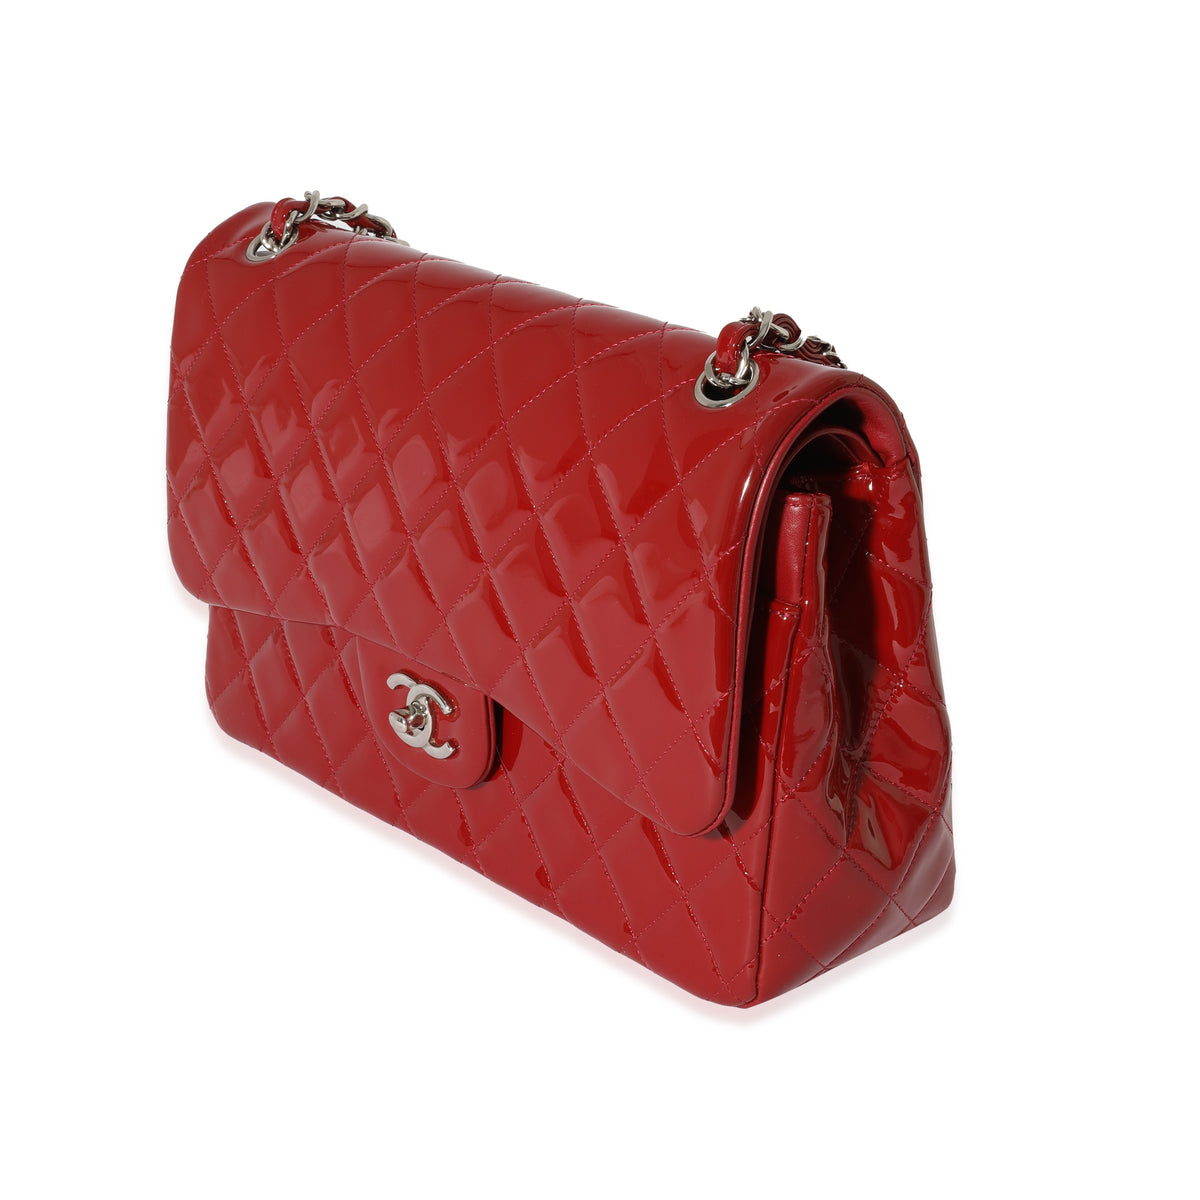 Chanel Red Quilted Patent Leather Jumbo Double Flap Bag, myGemma, DE